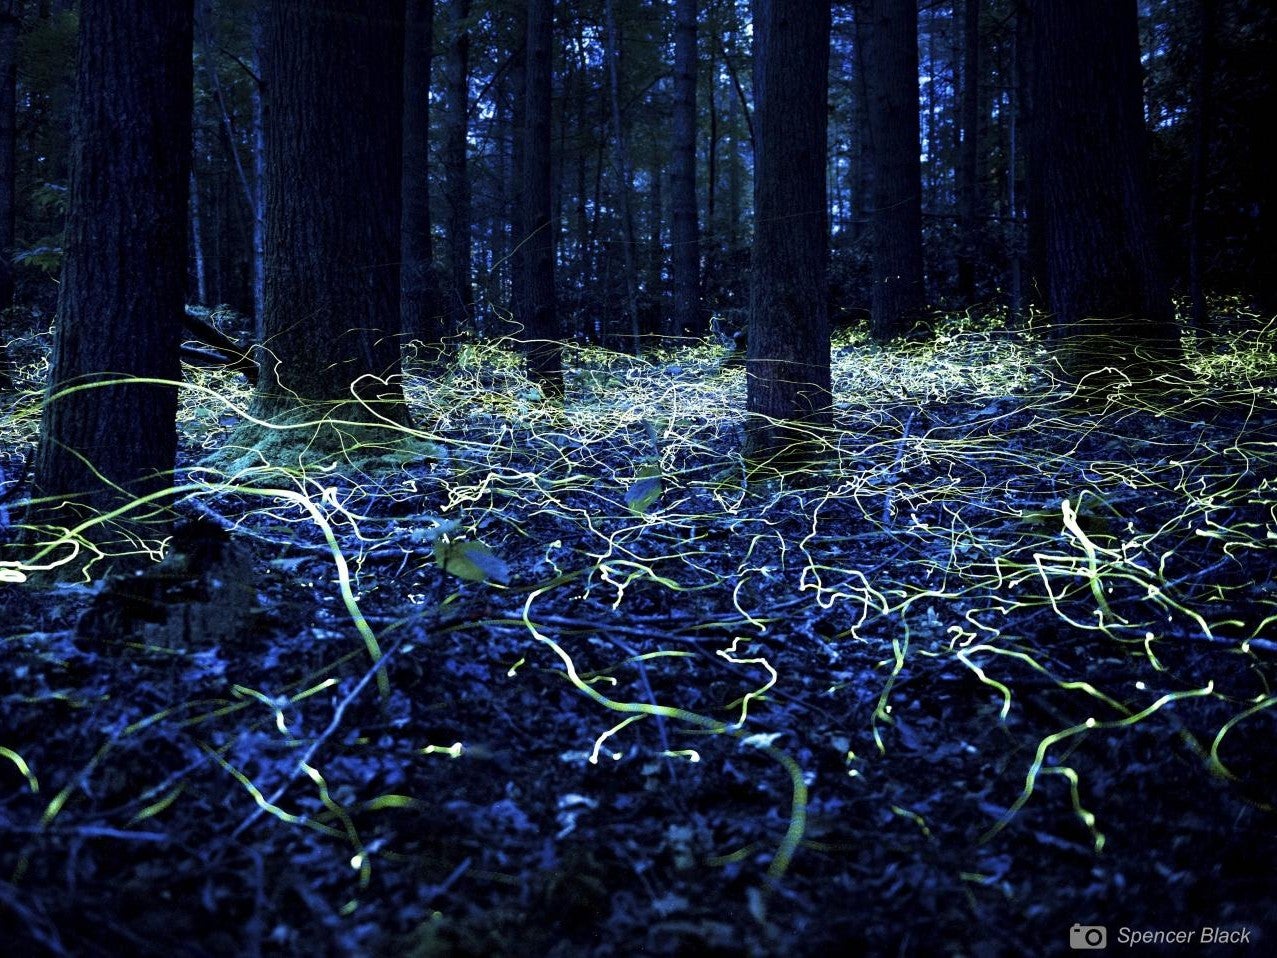 Male blue ghost fireflies in a forest in North Carolina